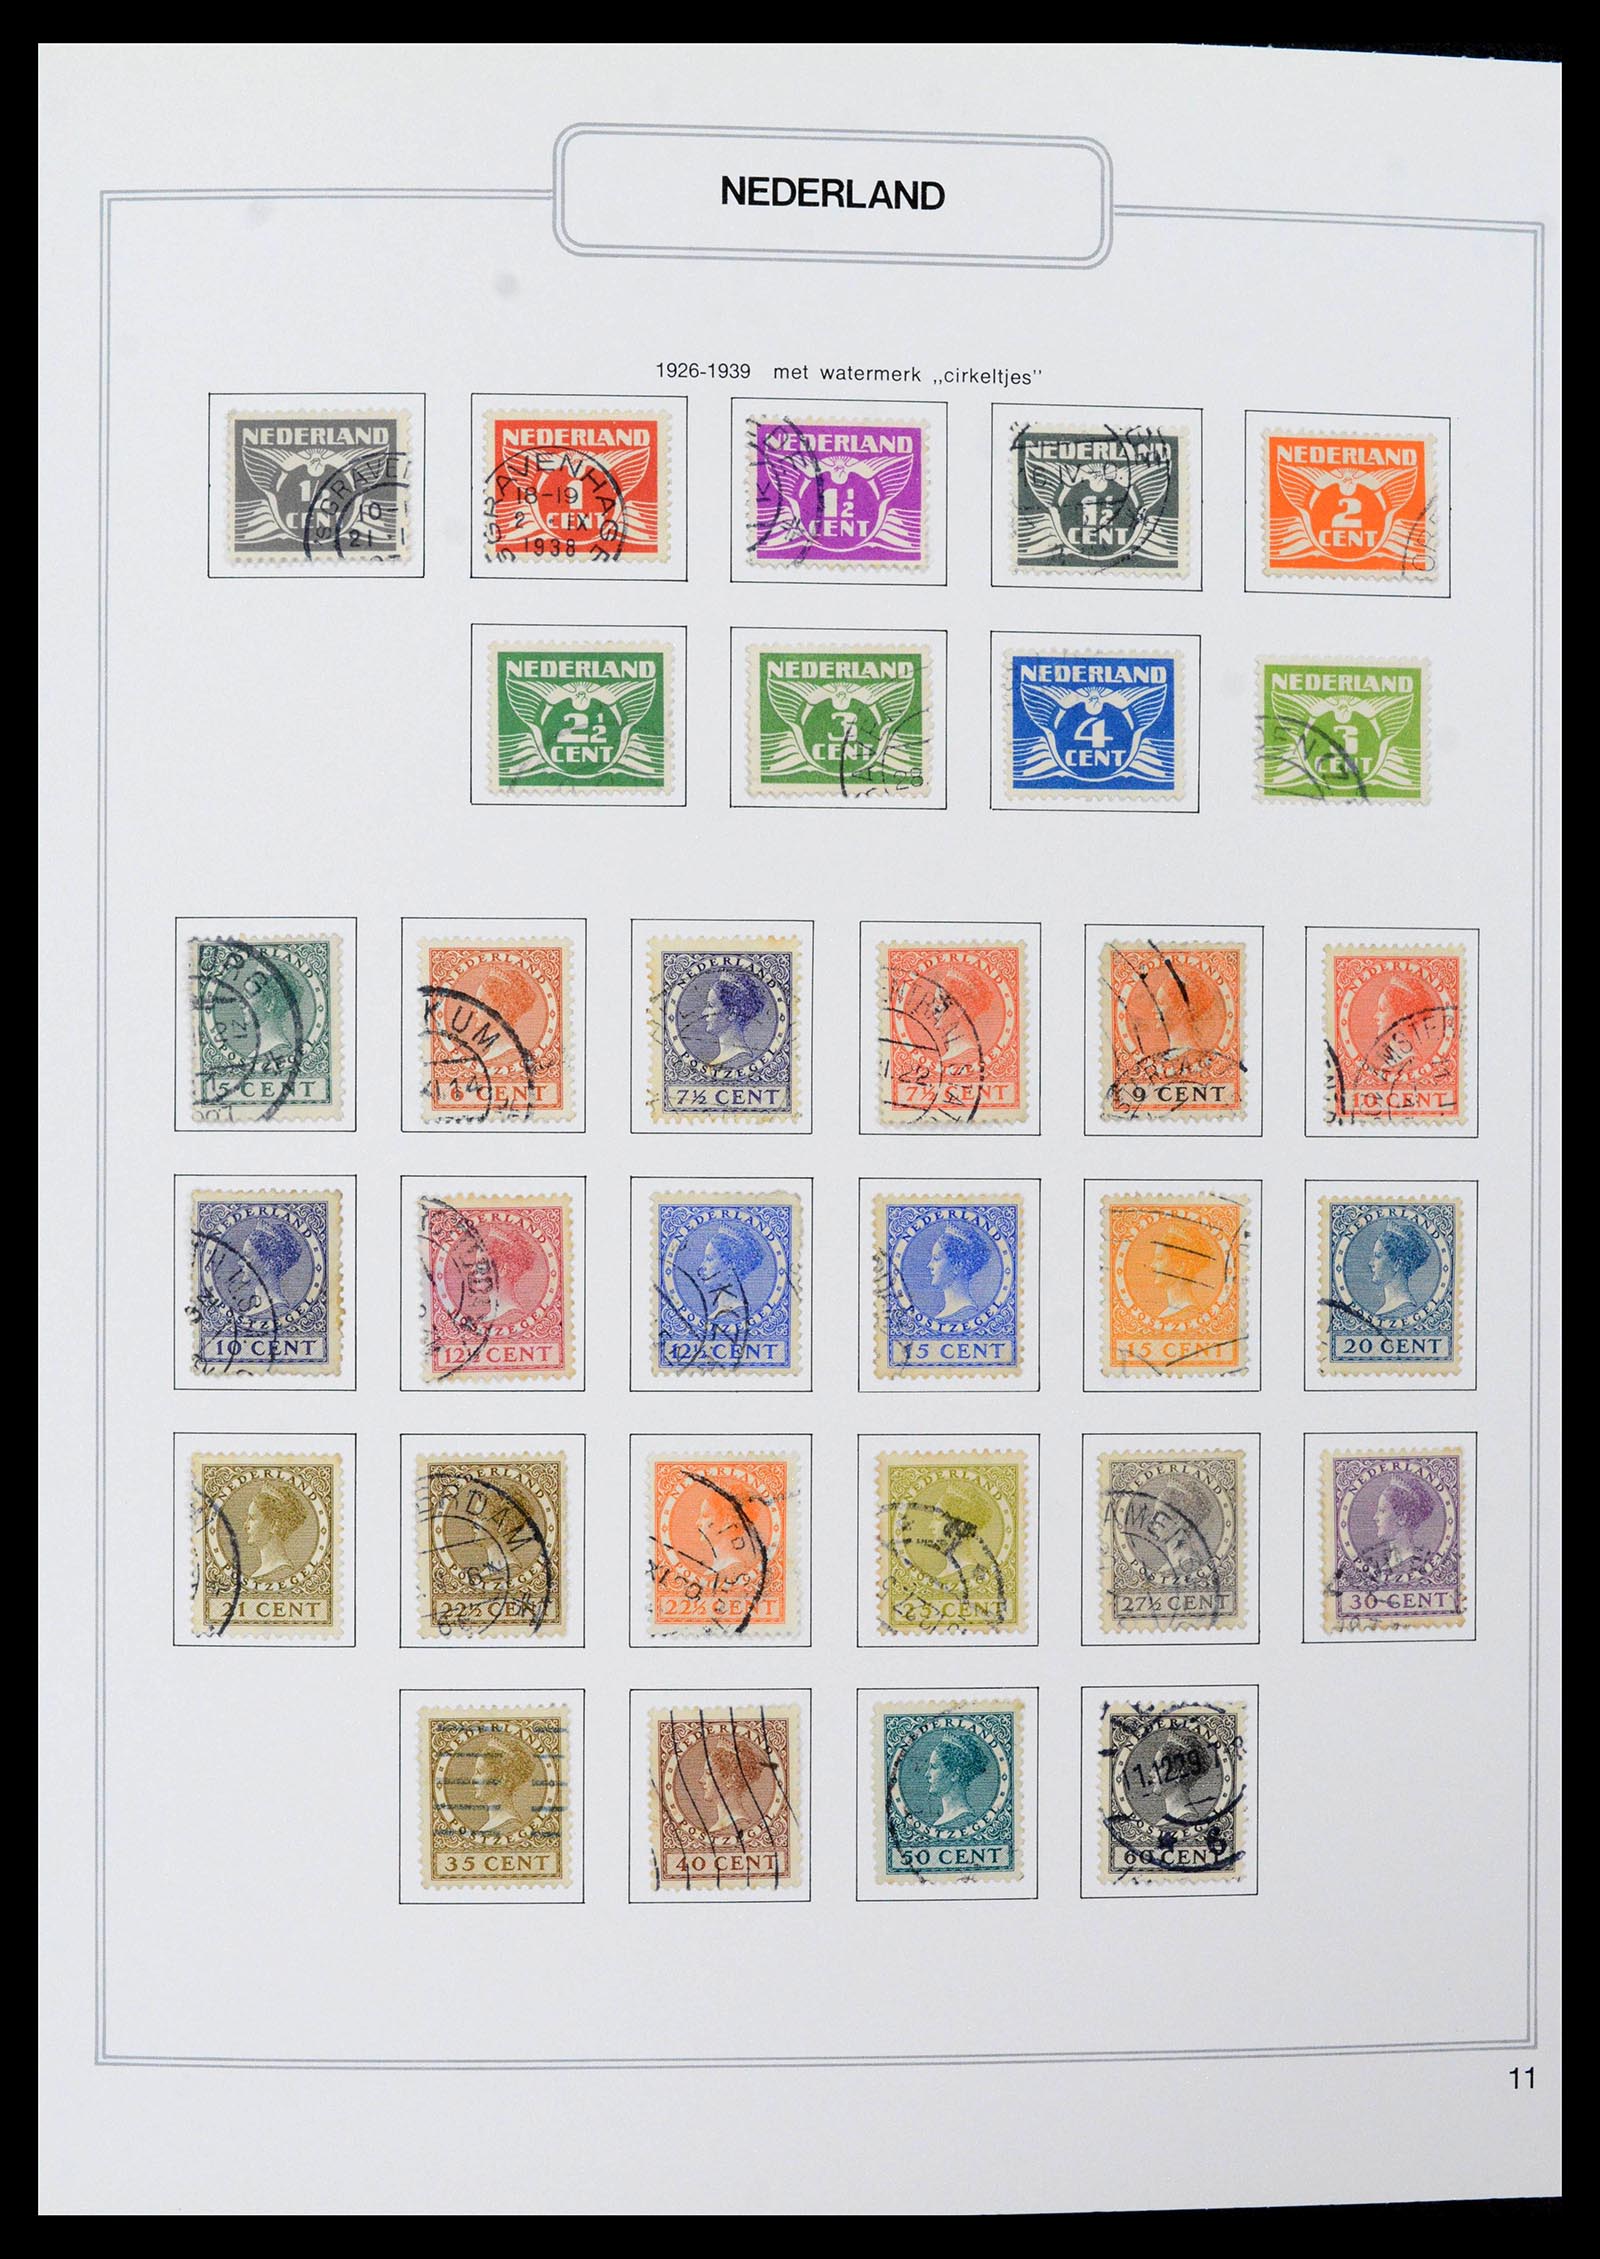 39261 0011 - Stamp collection 39261 Netherlands 1852-2015.